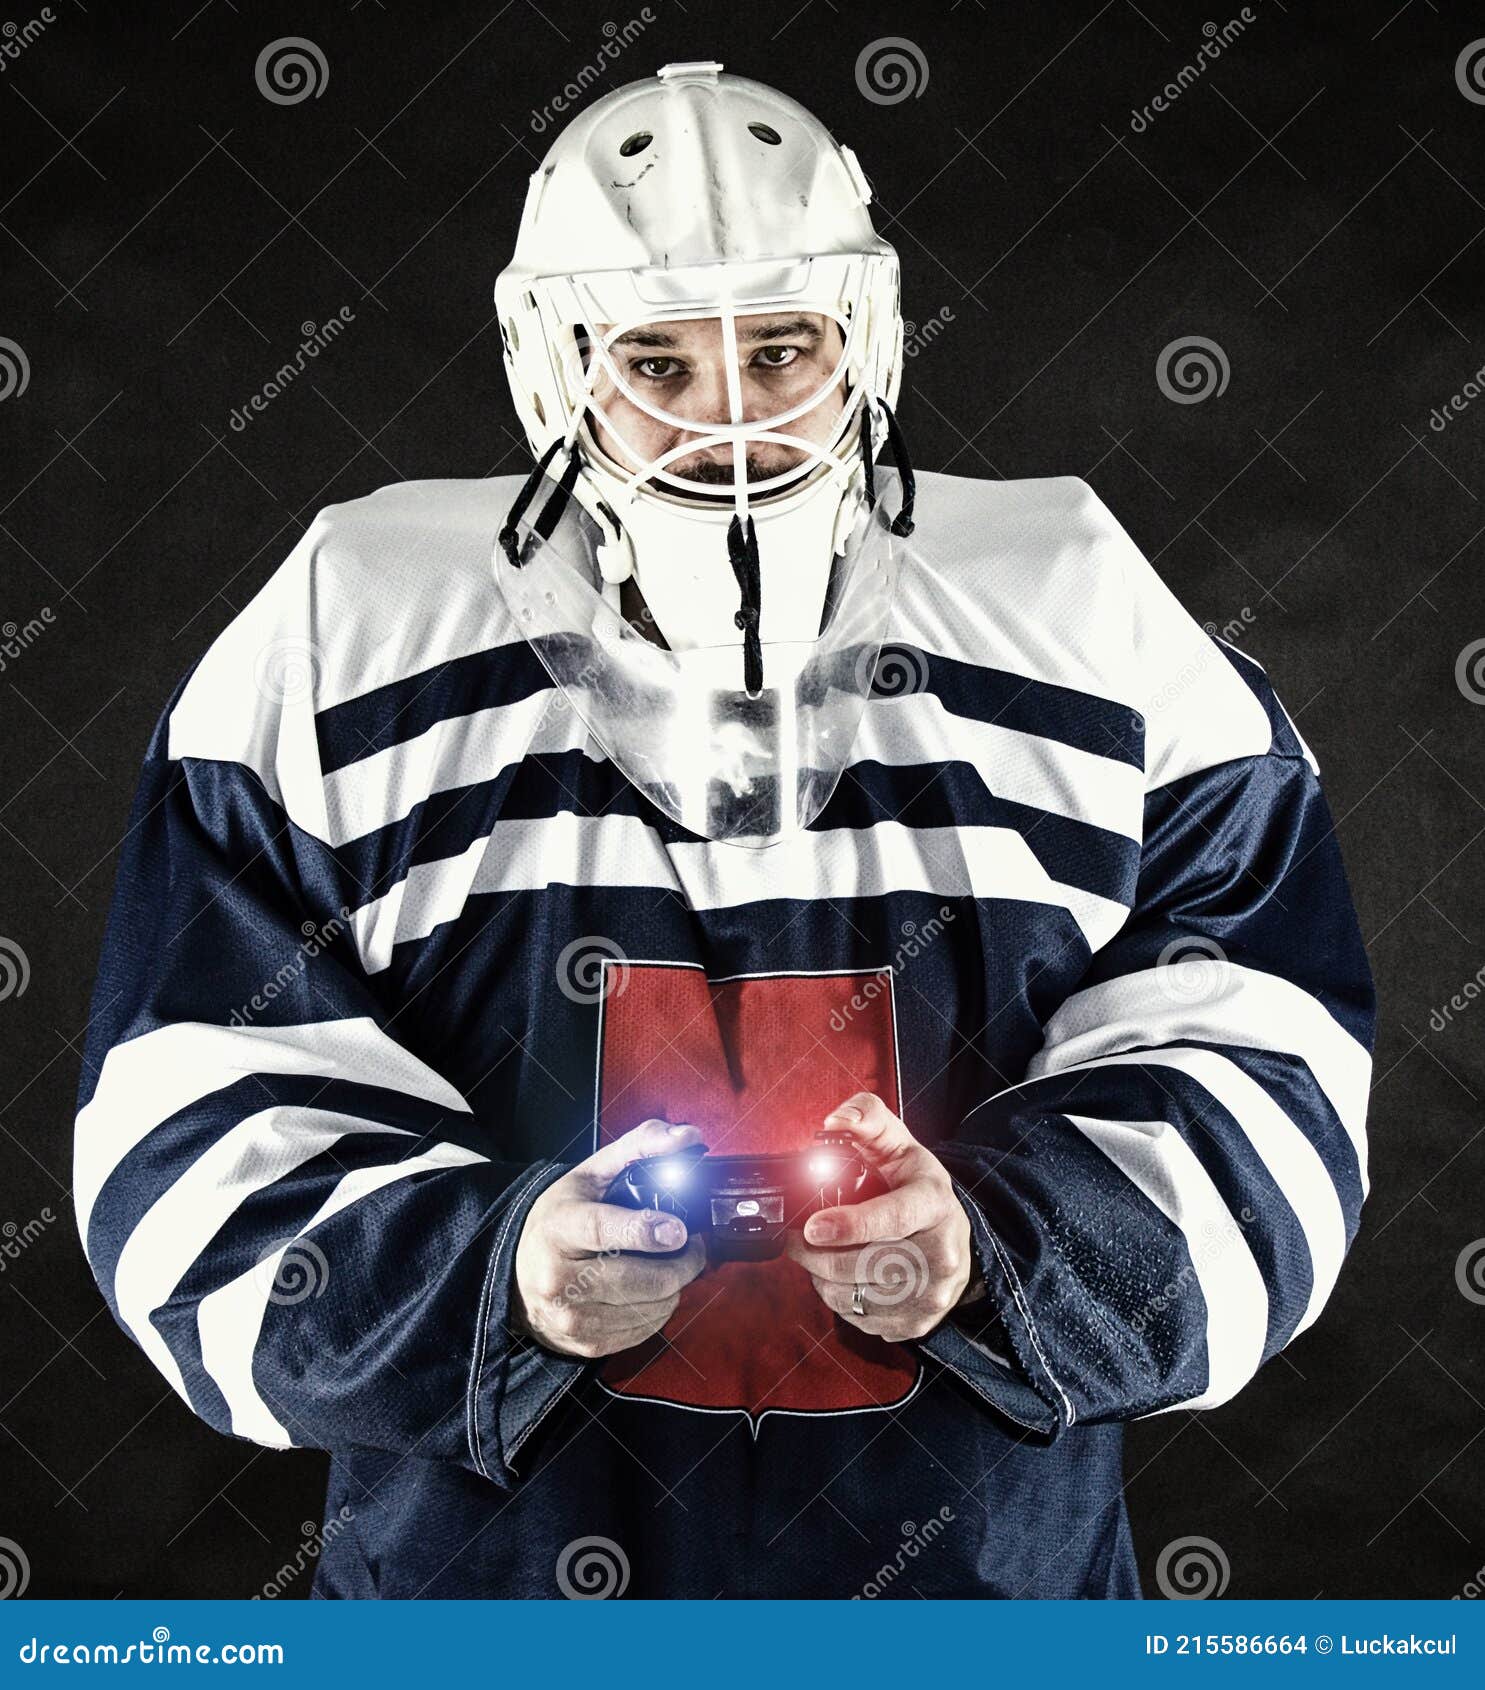 Hockey Goalie in Complete Hockey Outfit Sitting on Office Chair. Above Him  are Lamps with a Light Bulb on. Stock Image - Image of dress, complete:  161355677